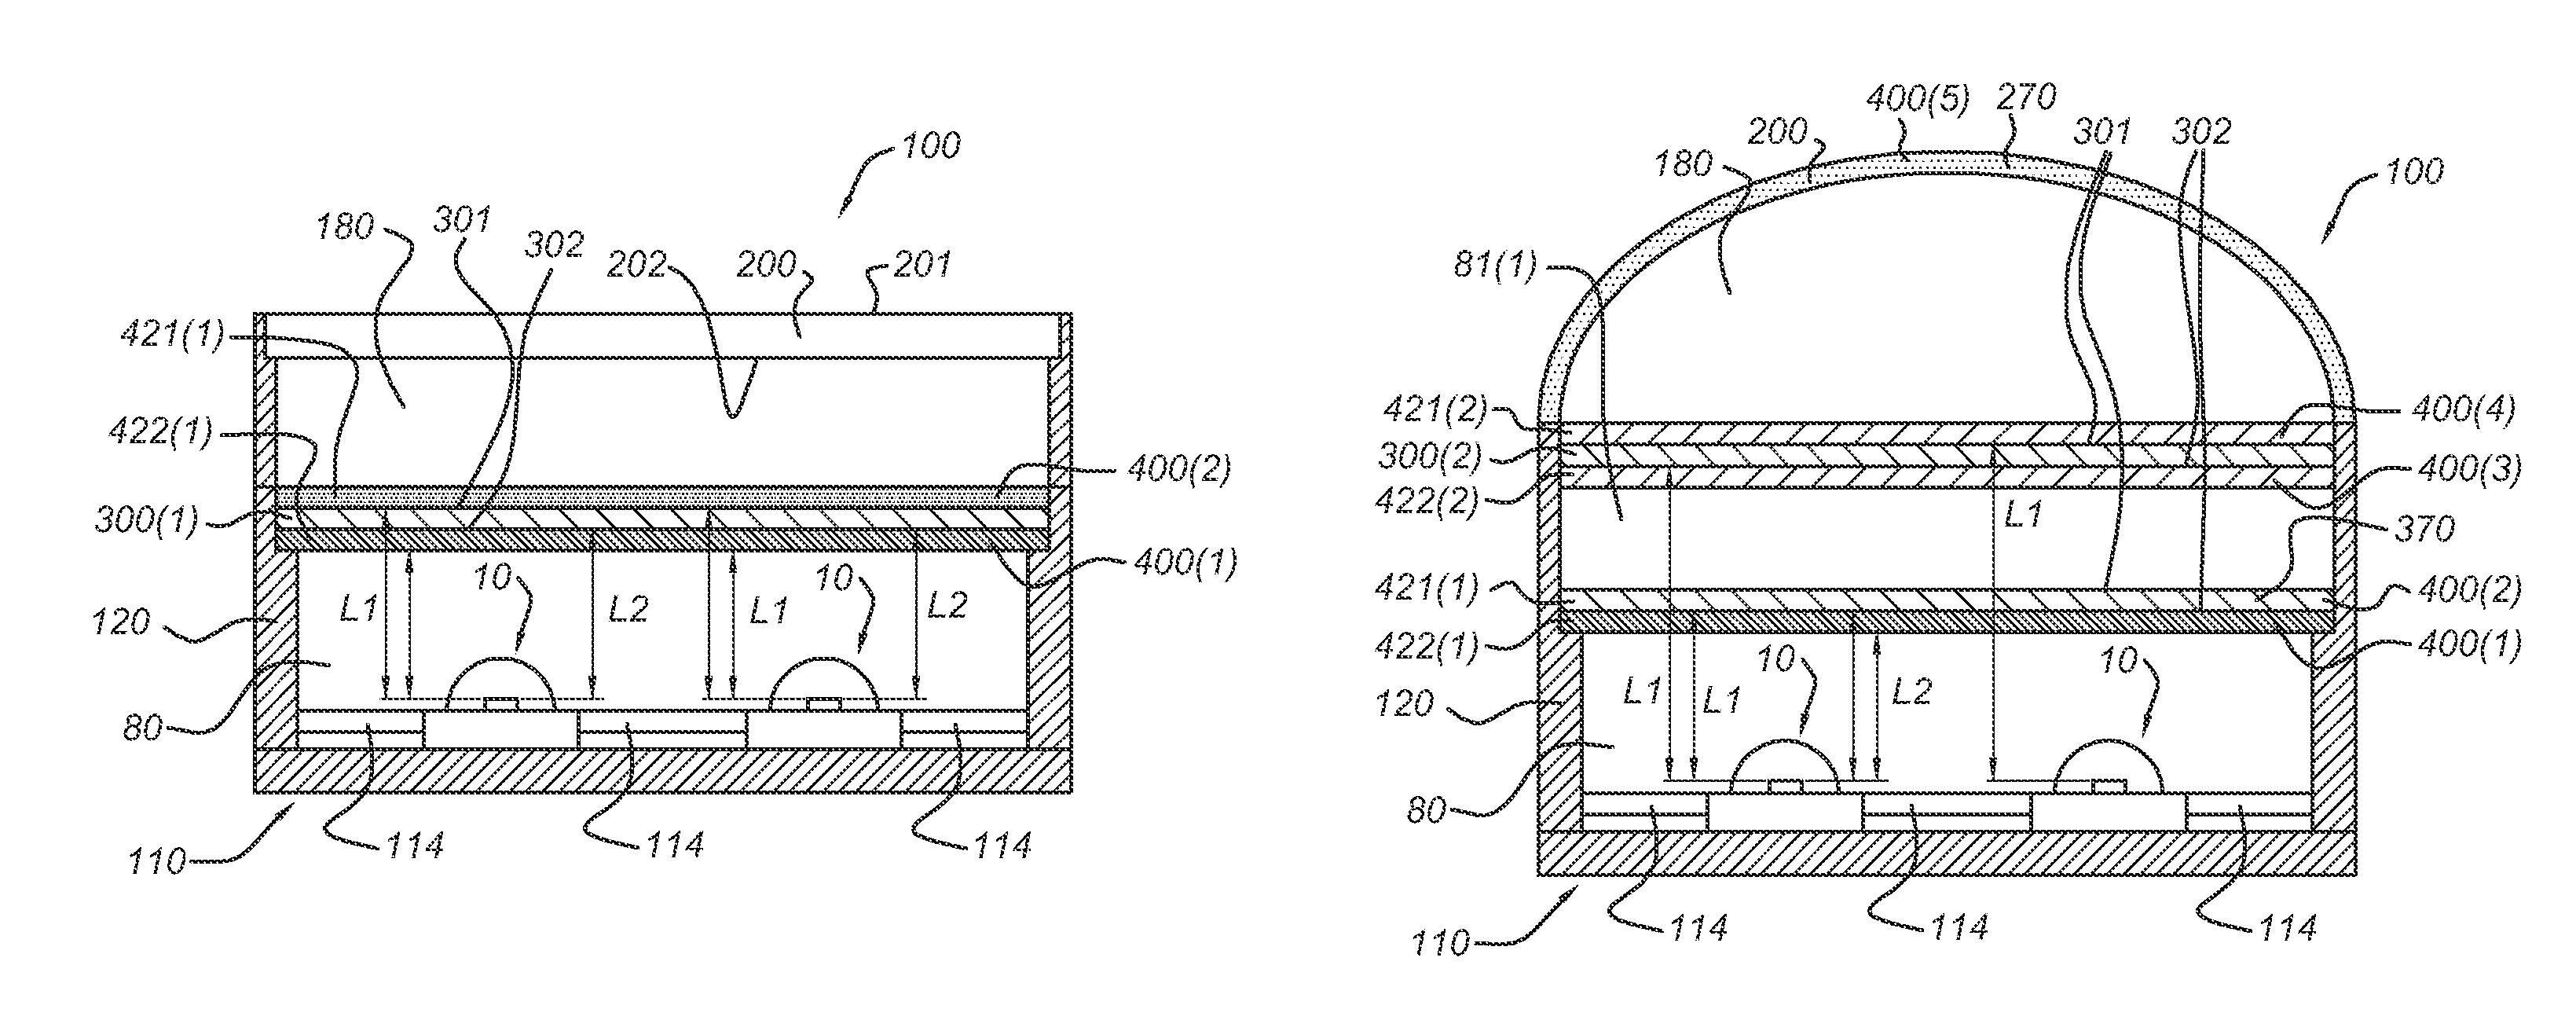 Illumination device with LED and one or more transmissive windows